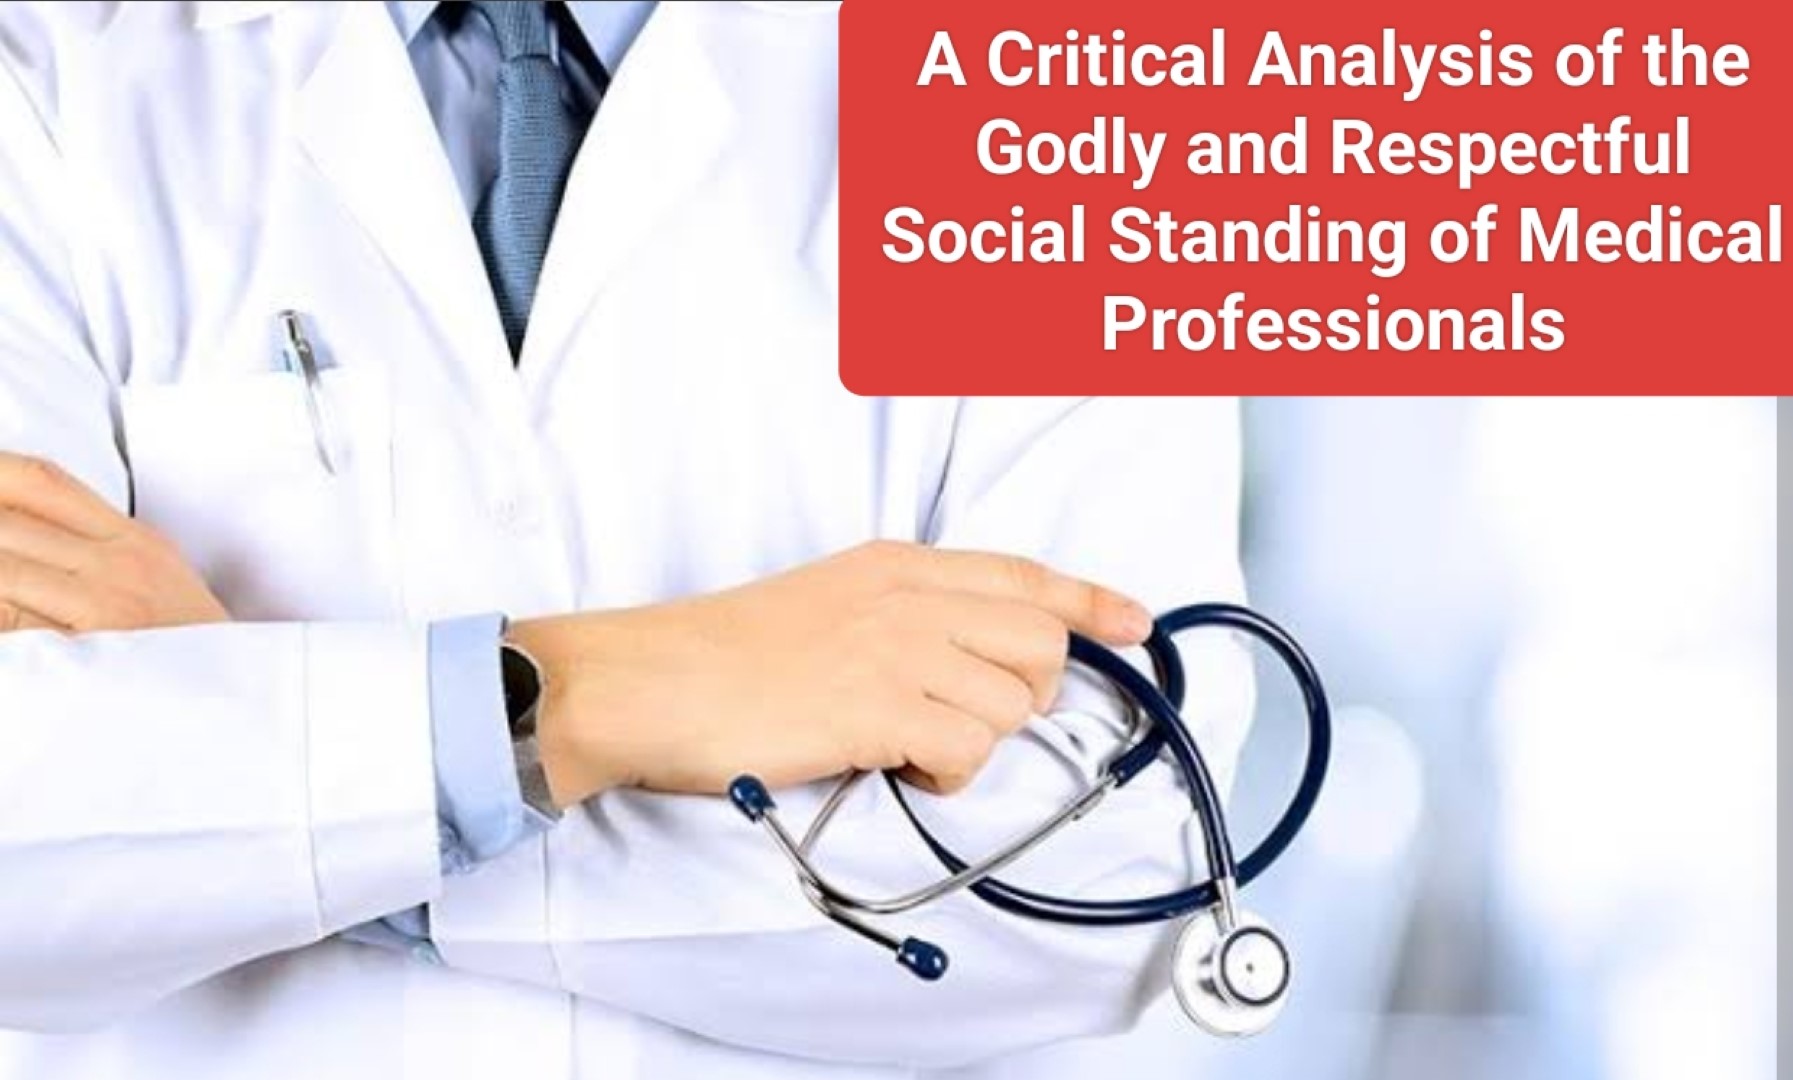 From Altar to Pedestal- A Critical Analysis of the Godly and Respectful Social Standing of Medical Professionals